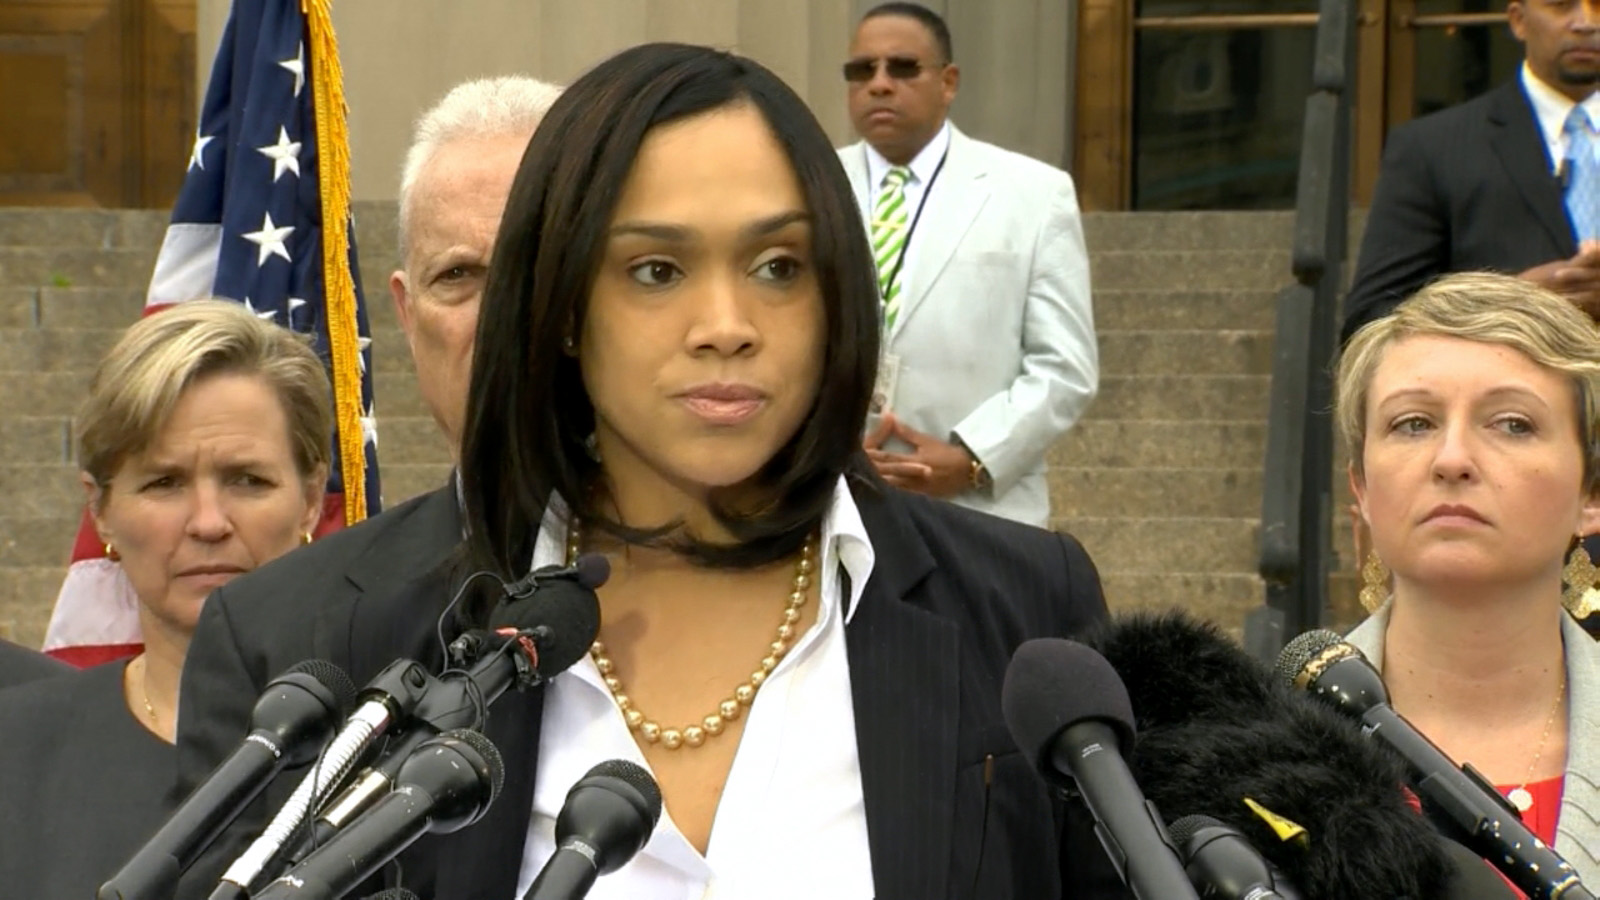 State's Attorney Marilyn Mosby